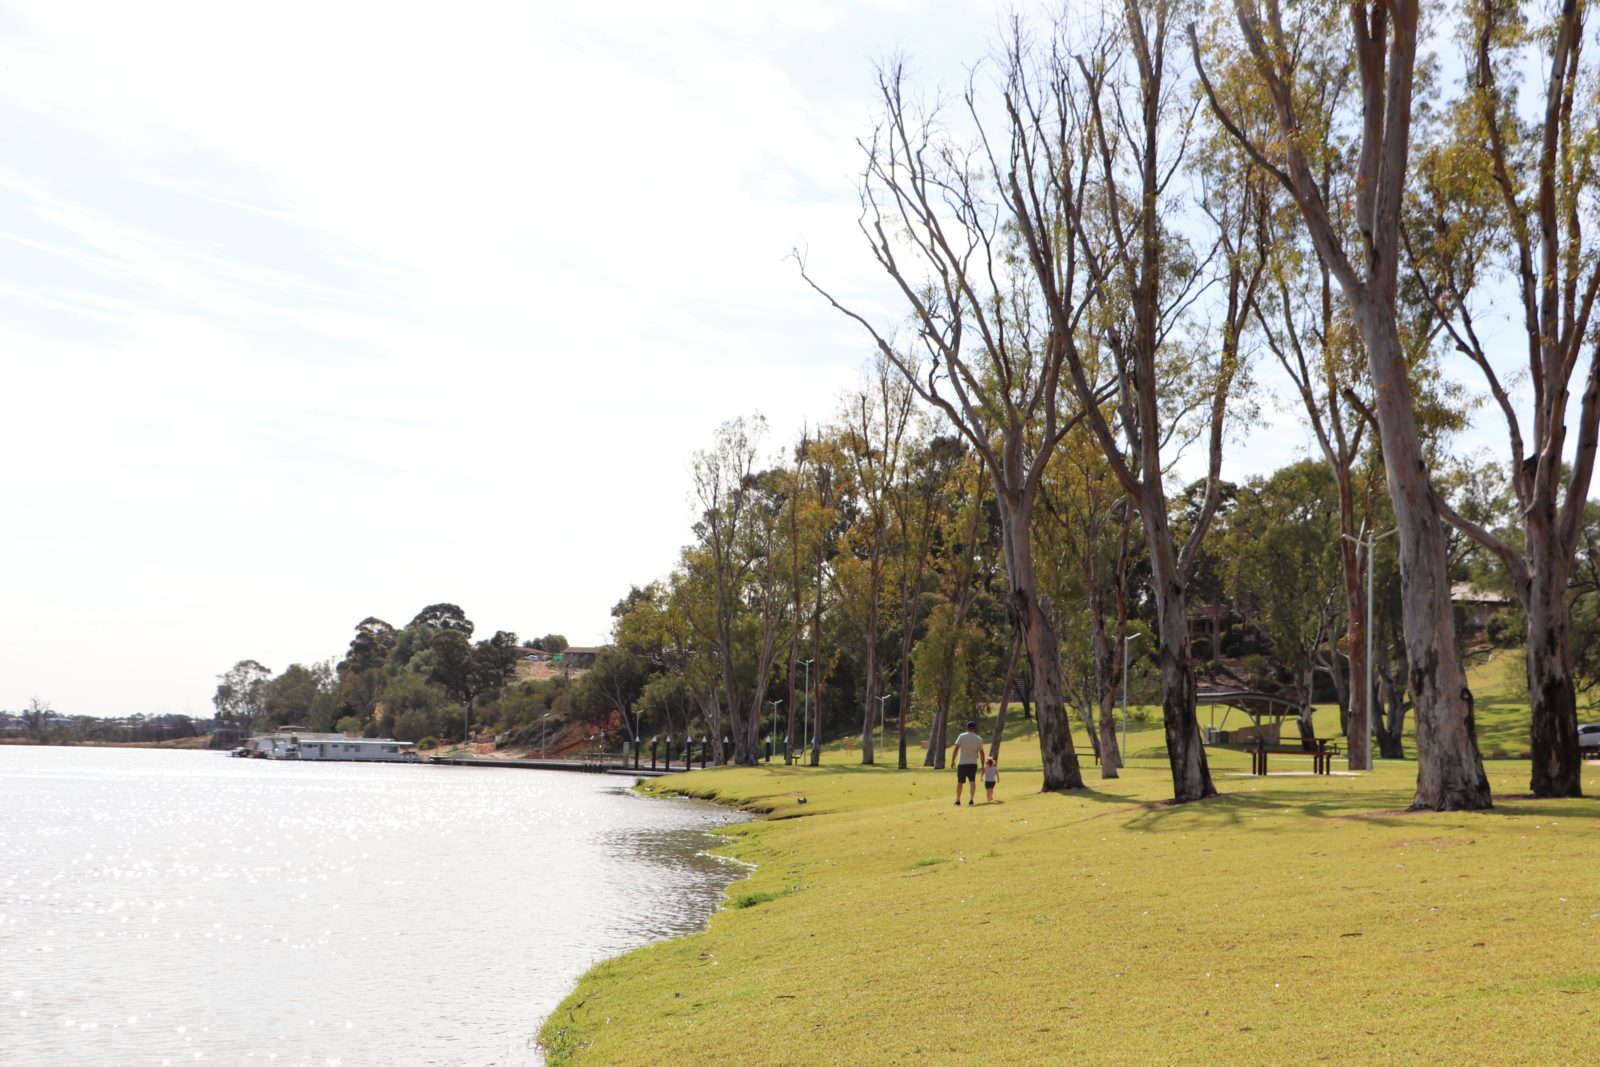 The grassy riverfront area is dotted with large gum trees.